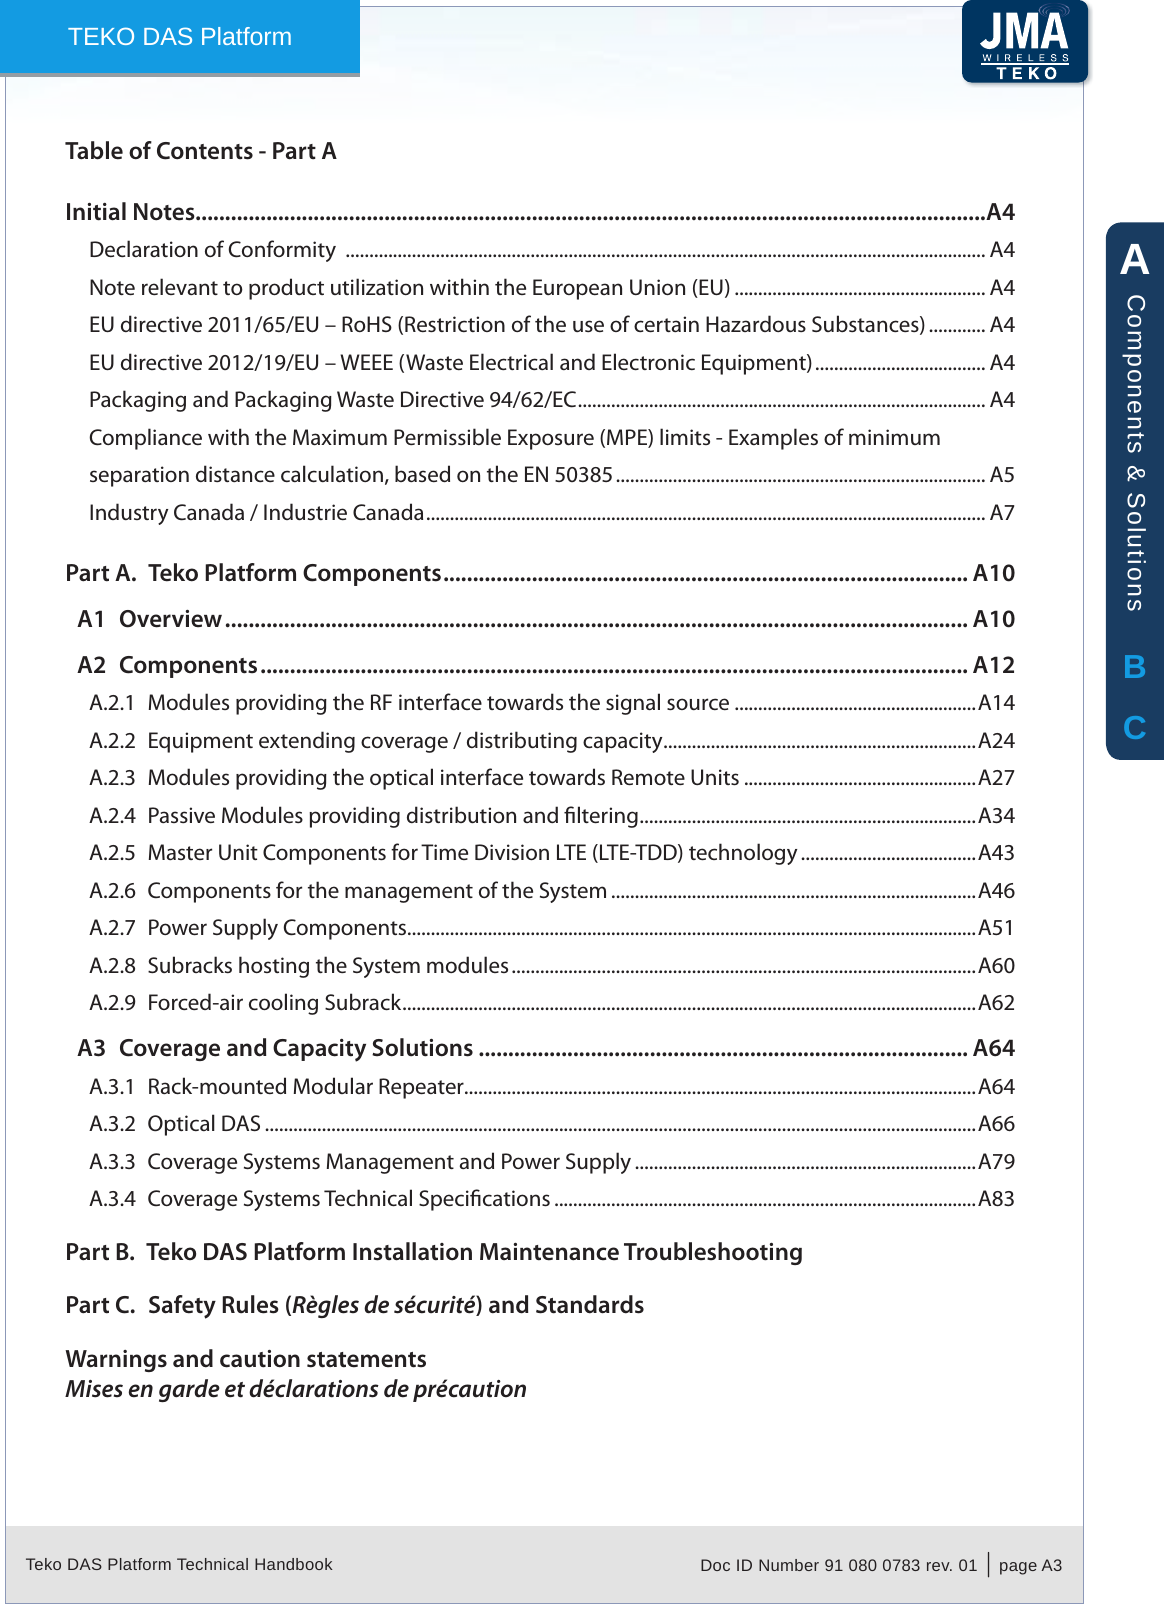 Teko DAS Platform Technical Handbook Doc ID Number 91 080 0783 rev. 01  |  page A3TEKO DAS PlatformTable of Contents - Part AInitial Notes......................................................................................................................................A4Declaration of Conformity  ....................................................................................................................................... A4Note relevant to product utilization within the European Union (EU) ..................................................... A4EU directive 2011/65/EU – RoHS (Restriction of the use of certain Hazardous Substances) ............ A4EU directive 2012/19/EU – WEEE (Waste Electrical and Electronic Equipment) .................................... A4Packaging and Packaging Waste Directive 94/62/EC ...................................................................................... A4Compliance with the Maximum Permissible Exposure (MPE) limits - Examples of minimum separation distance calculation, based on the EN 50385 .............................................................................. A5Industry Canada / Industrie Canada ...................................................................................................................... A7Part A.  Teko Platform Components ......................................................................................... A10A1  Overview .............................................................................................................................. A10A2  Components ........................................................................................................................ A12A.2.1  Modules providing the RF interface towards the signal source ...................................................A14A.2.2  Equipment extending coverage / distributing capacity ..................................................................A24A.2.3  Modules providing the optical interface towards Remote Units .................................................A27A.2.4  Passive Modules providing distribution and ltering .......................................................................A34A.2.5  Master Unit Components for Time Division LTE (LTE-TDD) technology .....................................A43A.2.6  Components for the management of the System .............................................................................A46A.2.7  Power Supply Components ........................................................................................................................A51A.2.8  Subracks hosting the System modules ..................................................................................................A60A.2.9  Forced-air cooling Subrack .........................................................................................................................A62A3  Coverage and Capacity Solutions ................................................................................... A64A.3.1  Rack-mounted Modular Repeater............................................................................................................A64A.3.2  Optical DAS ......................................................................................................................................................A66A.3.3  Coverage Systems Management and Power Supply ........................................................................A79A.3.4  Coverage Systems Technical Specications .........................................................................................A83Part B.  Teko DAS Platform Installation Maintenance TroubleshootingPart C.  Safety Rules (Règles de sécurité) and StandardsWarnings and caution statementsMises en garde et déclarations de précautionABCComponents &amp; Solutions